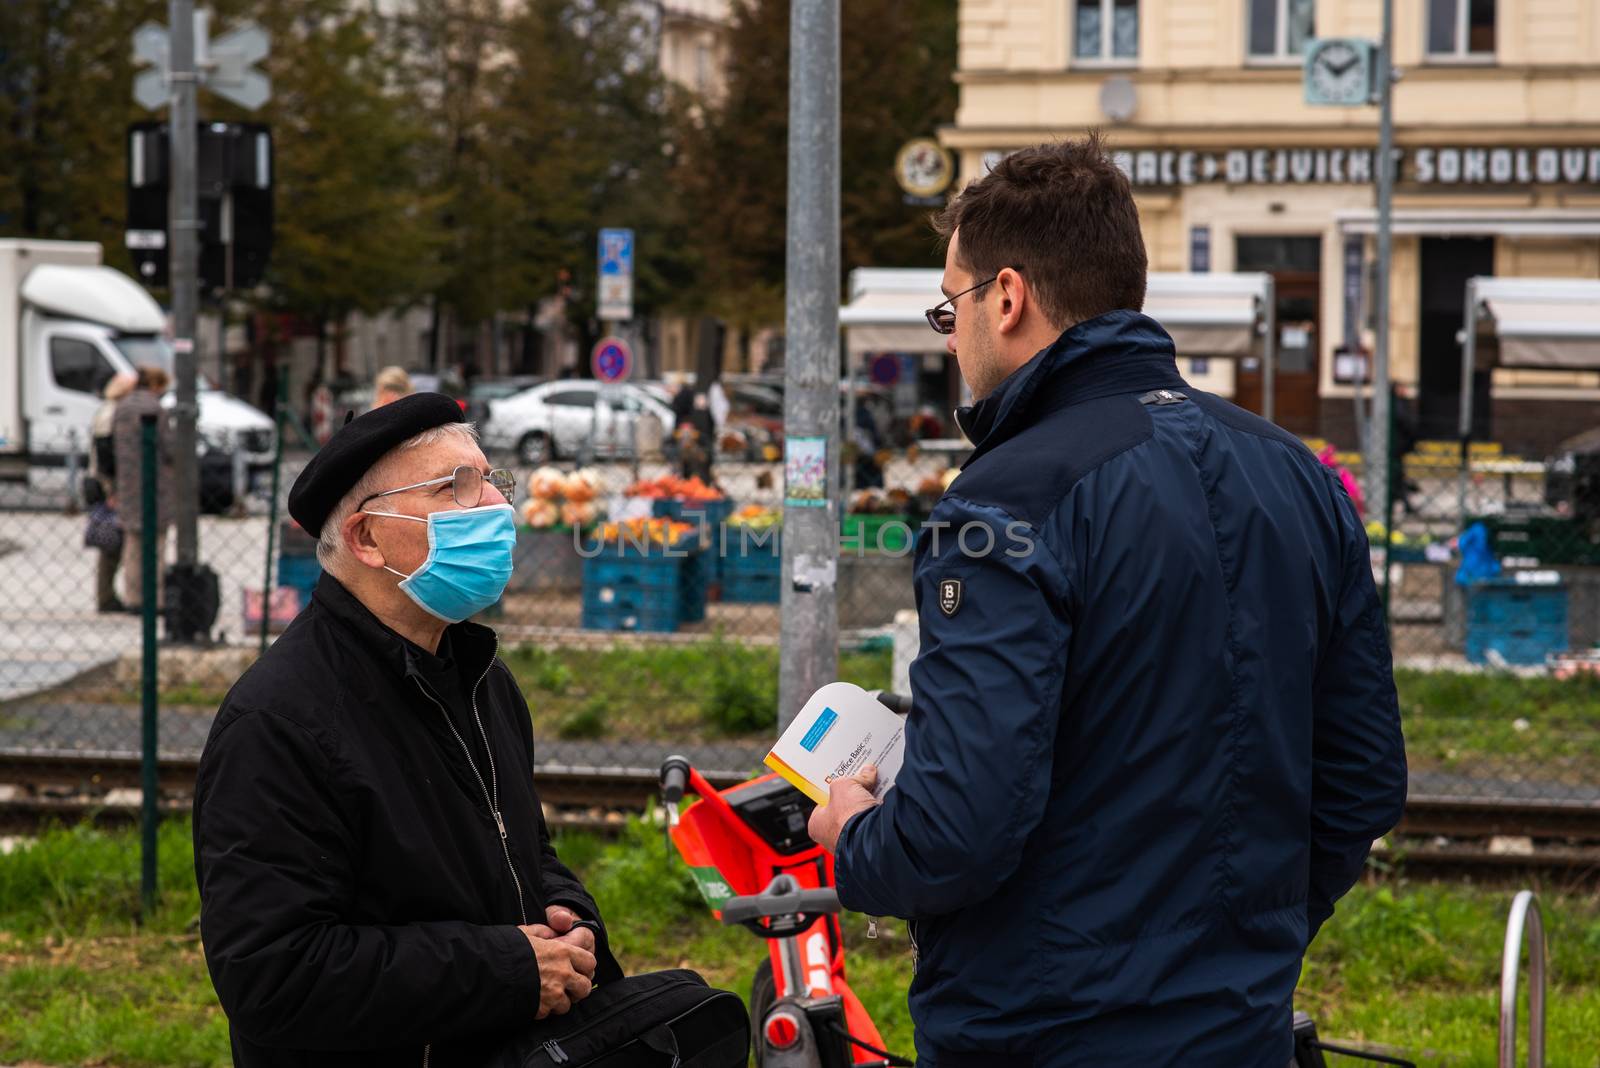 Two men (one with mask) are talking at Hradcanska metro station during quarantine period due to outbreak of COVID-19 as winter is starting. Prague, Czech Republic